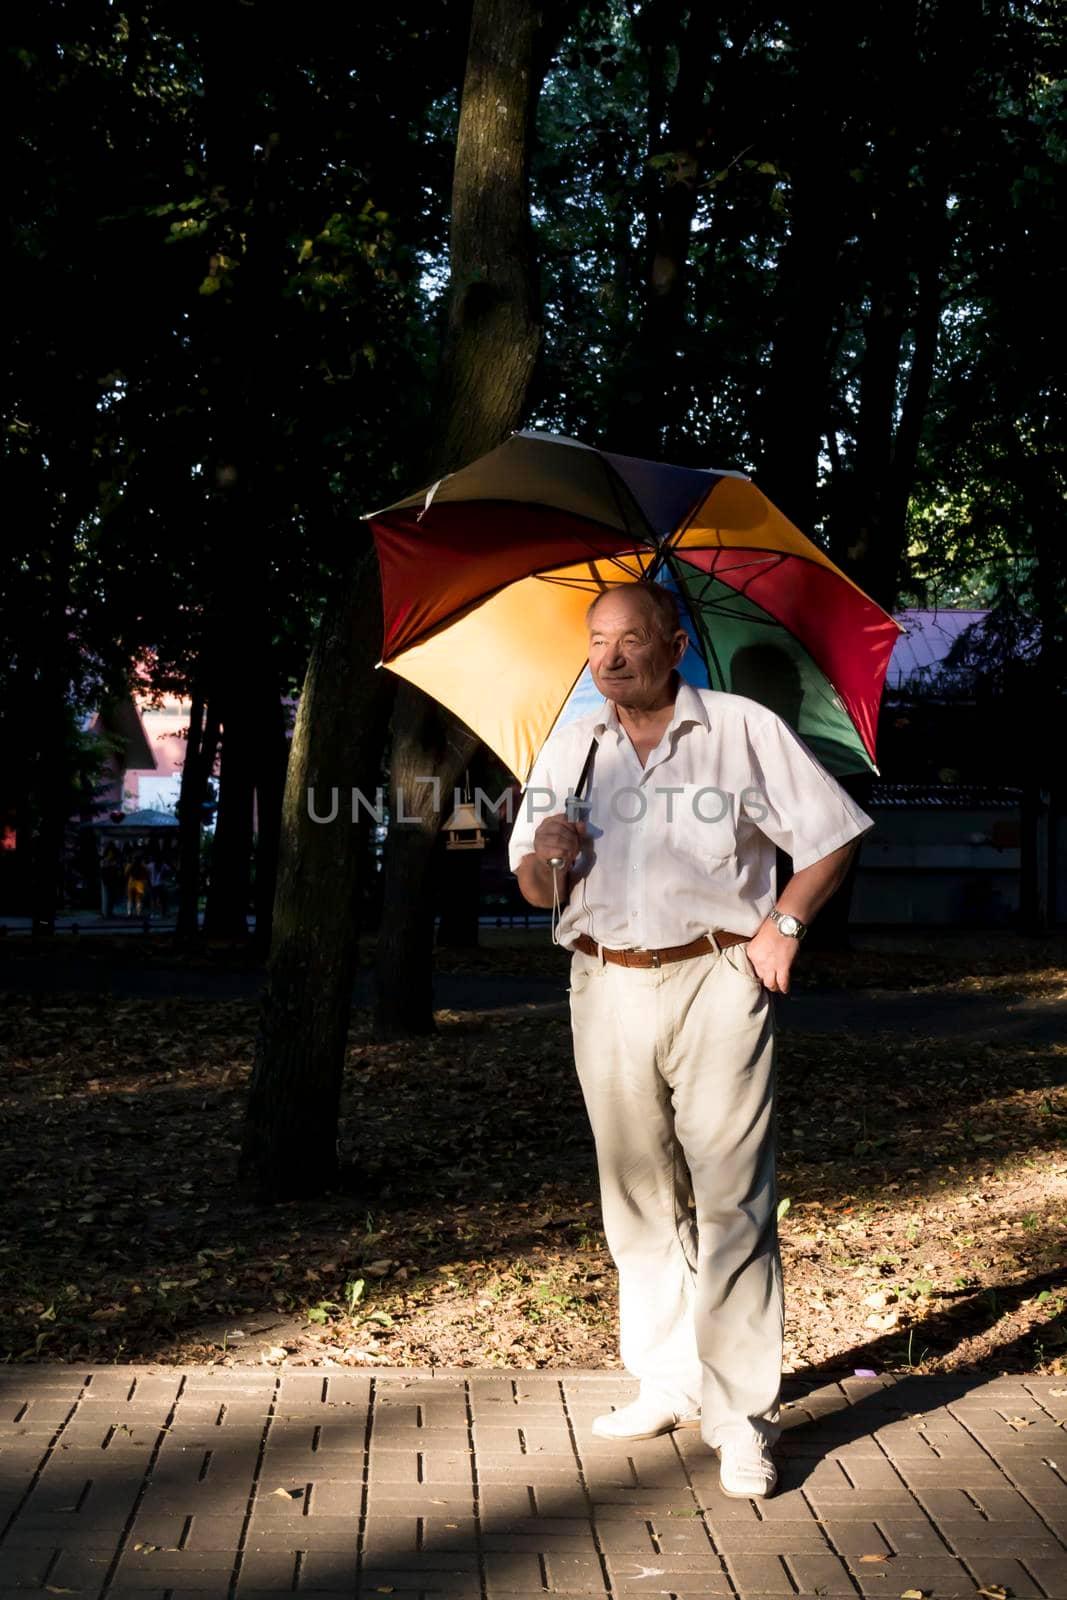 An elderly man stands under a large, multicolored umbrella. A pensioner on a walk in the park.